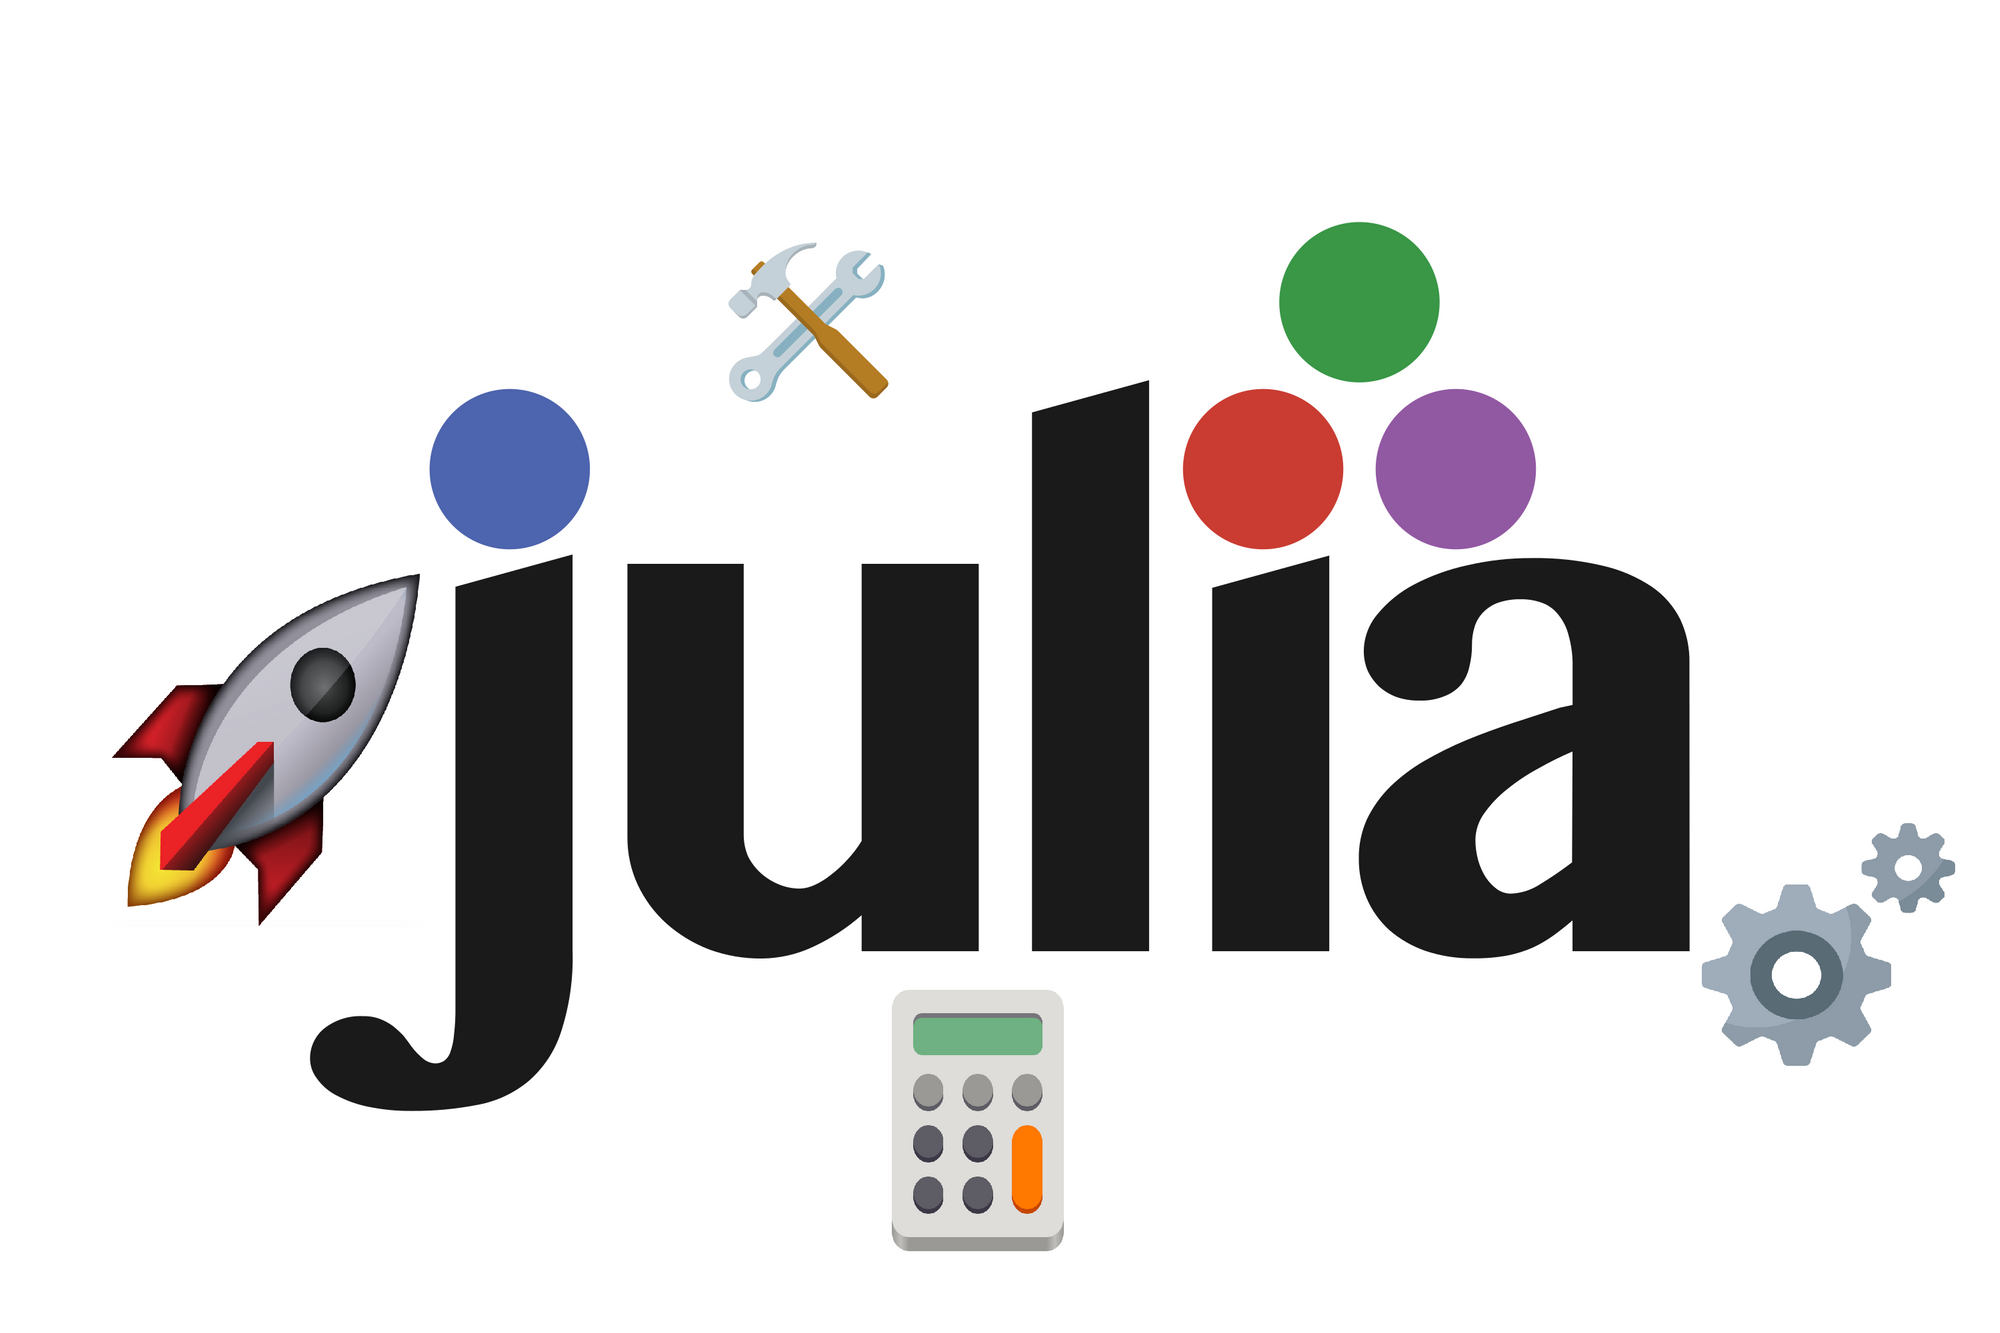 Julia Programming Applications – What is Julia Used For?